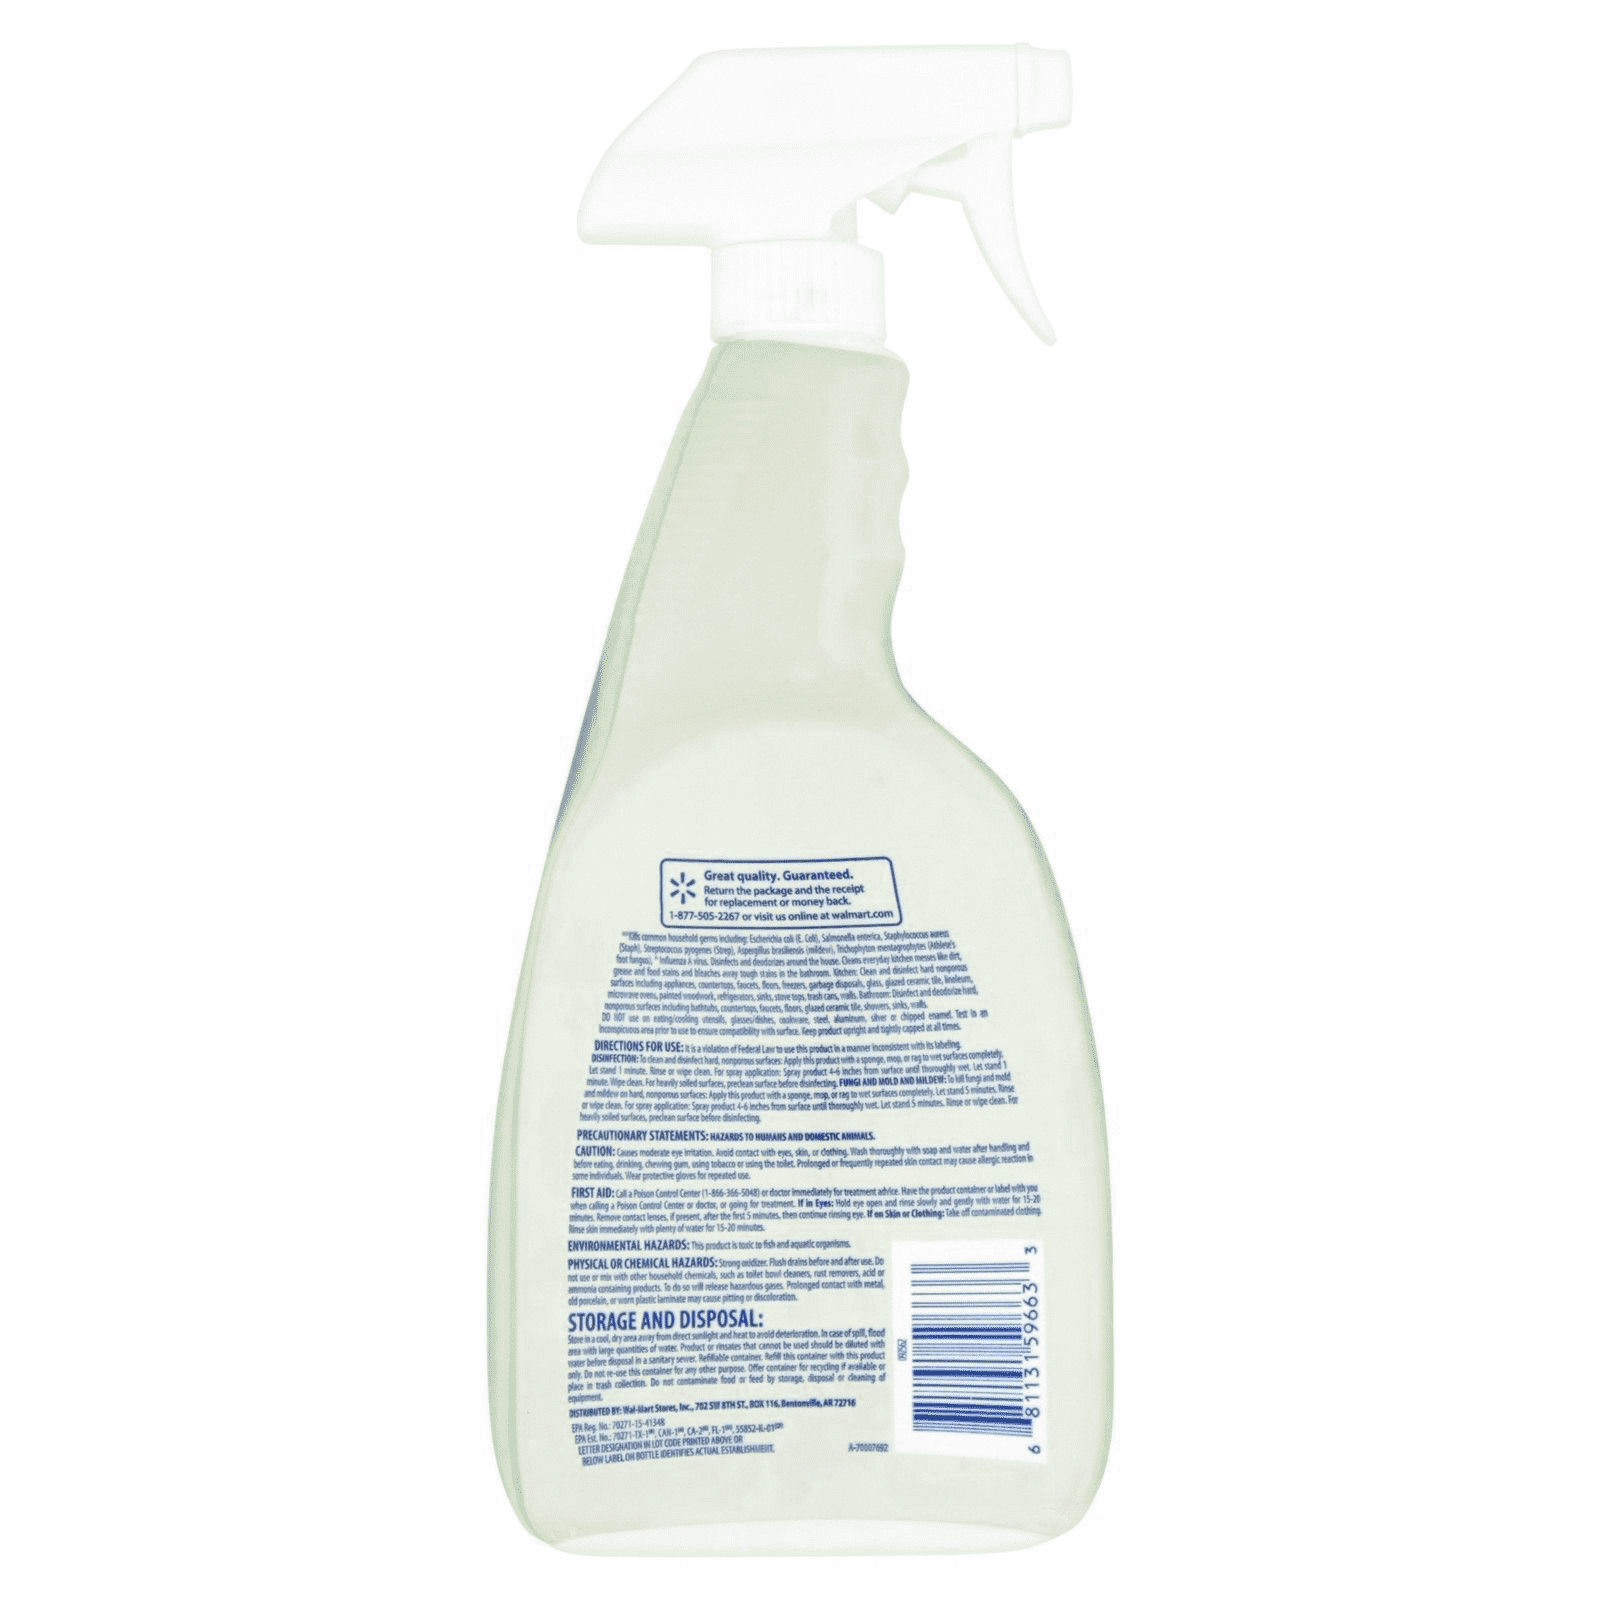 Great Value Bathroom Cleaner with Bleach 32oz